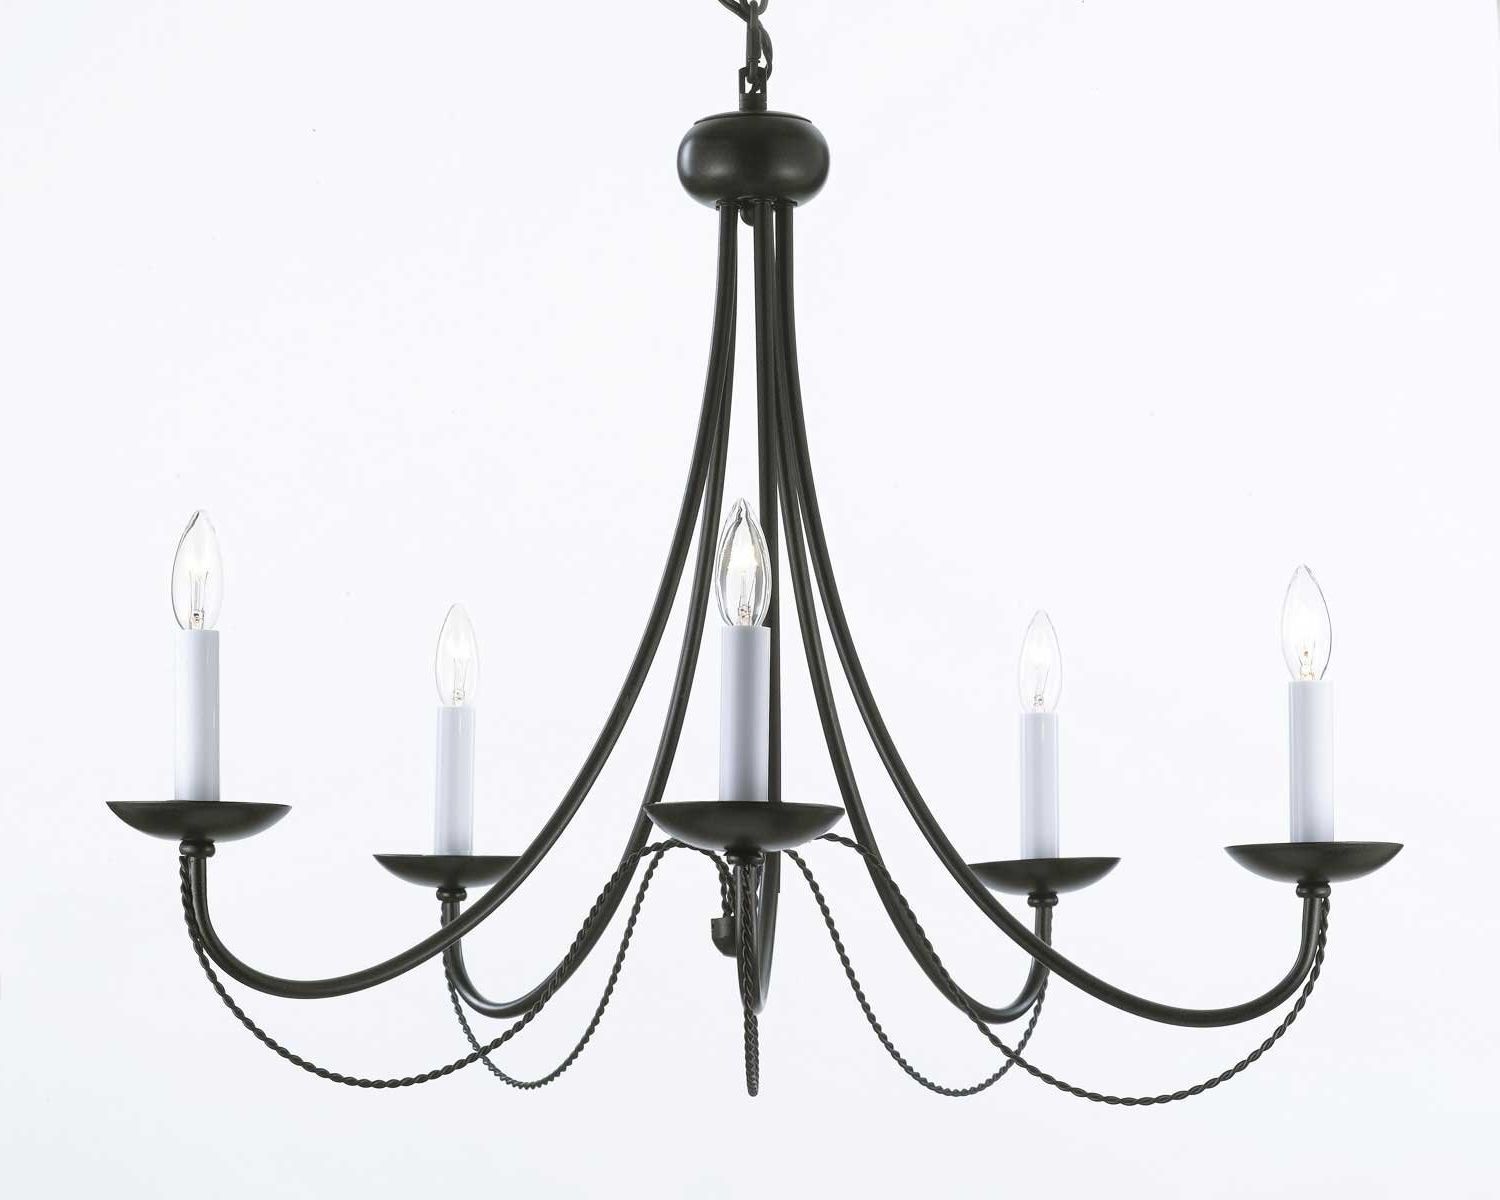 2019 Vintage Wrought Iron Chandelier With Rustic Chandelier Lighting – Vintage Rustic Chandelier Lighting (View 5 of 20)